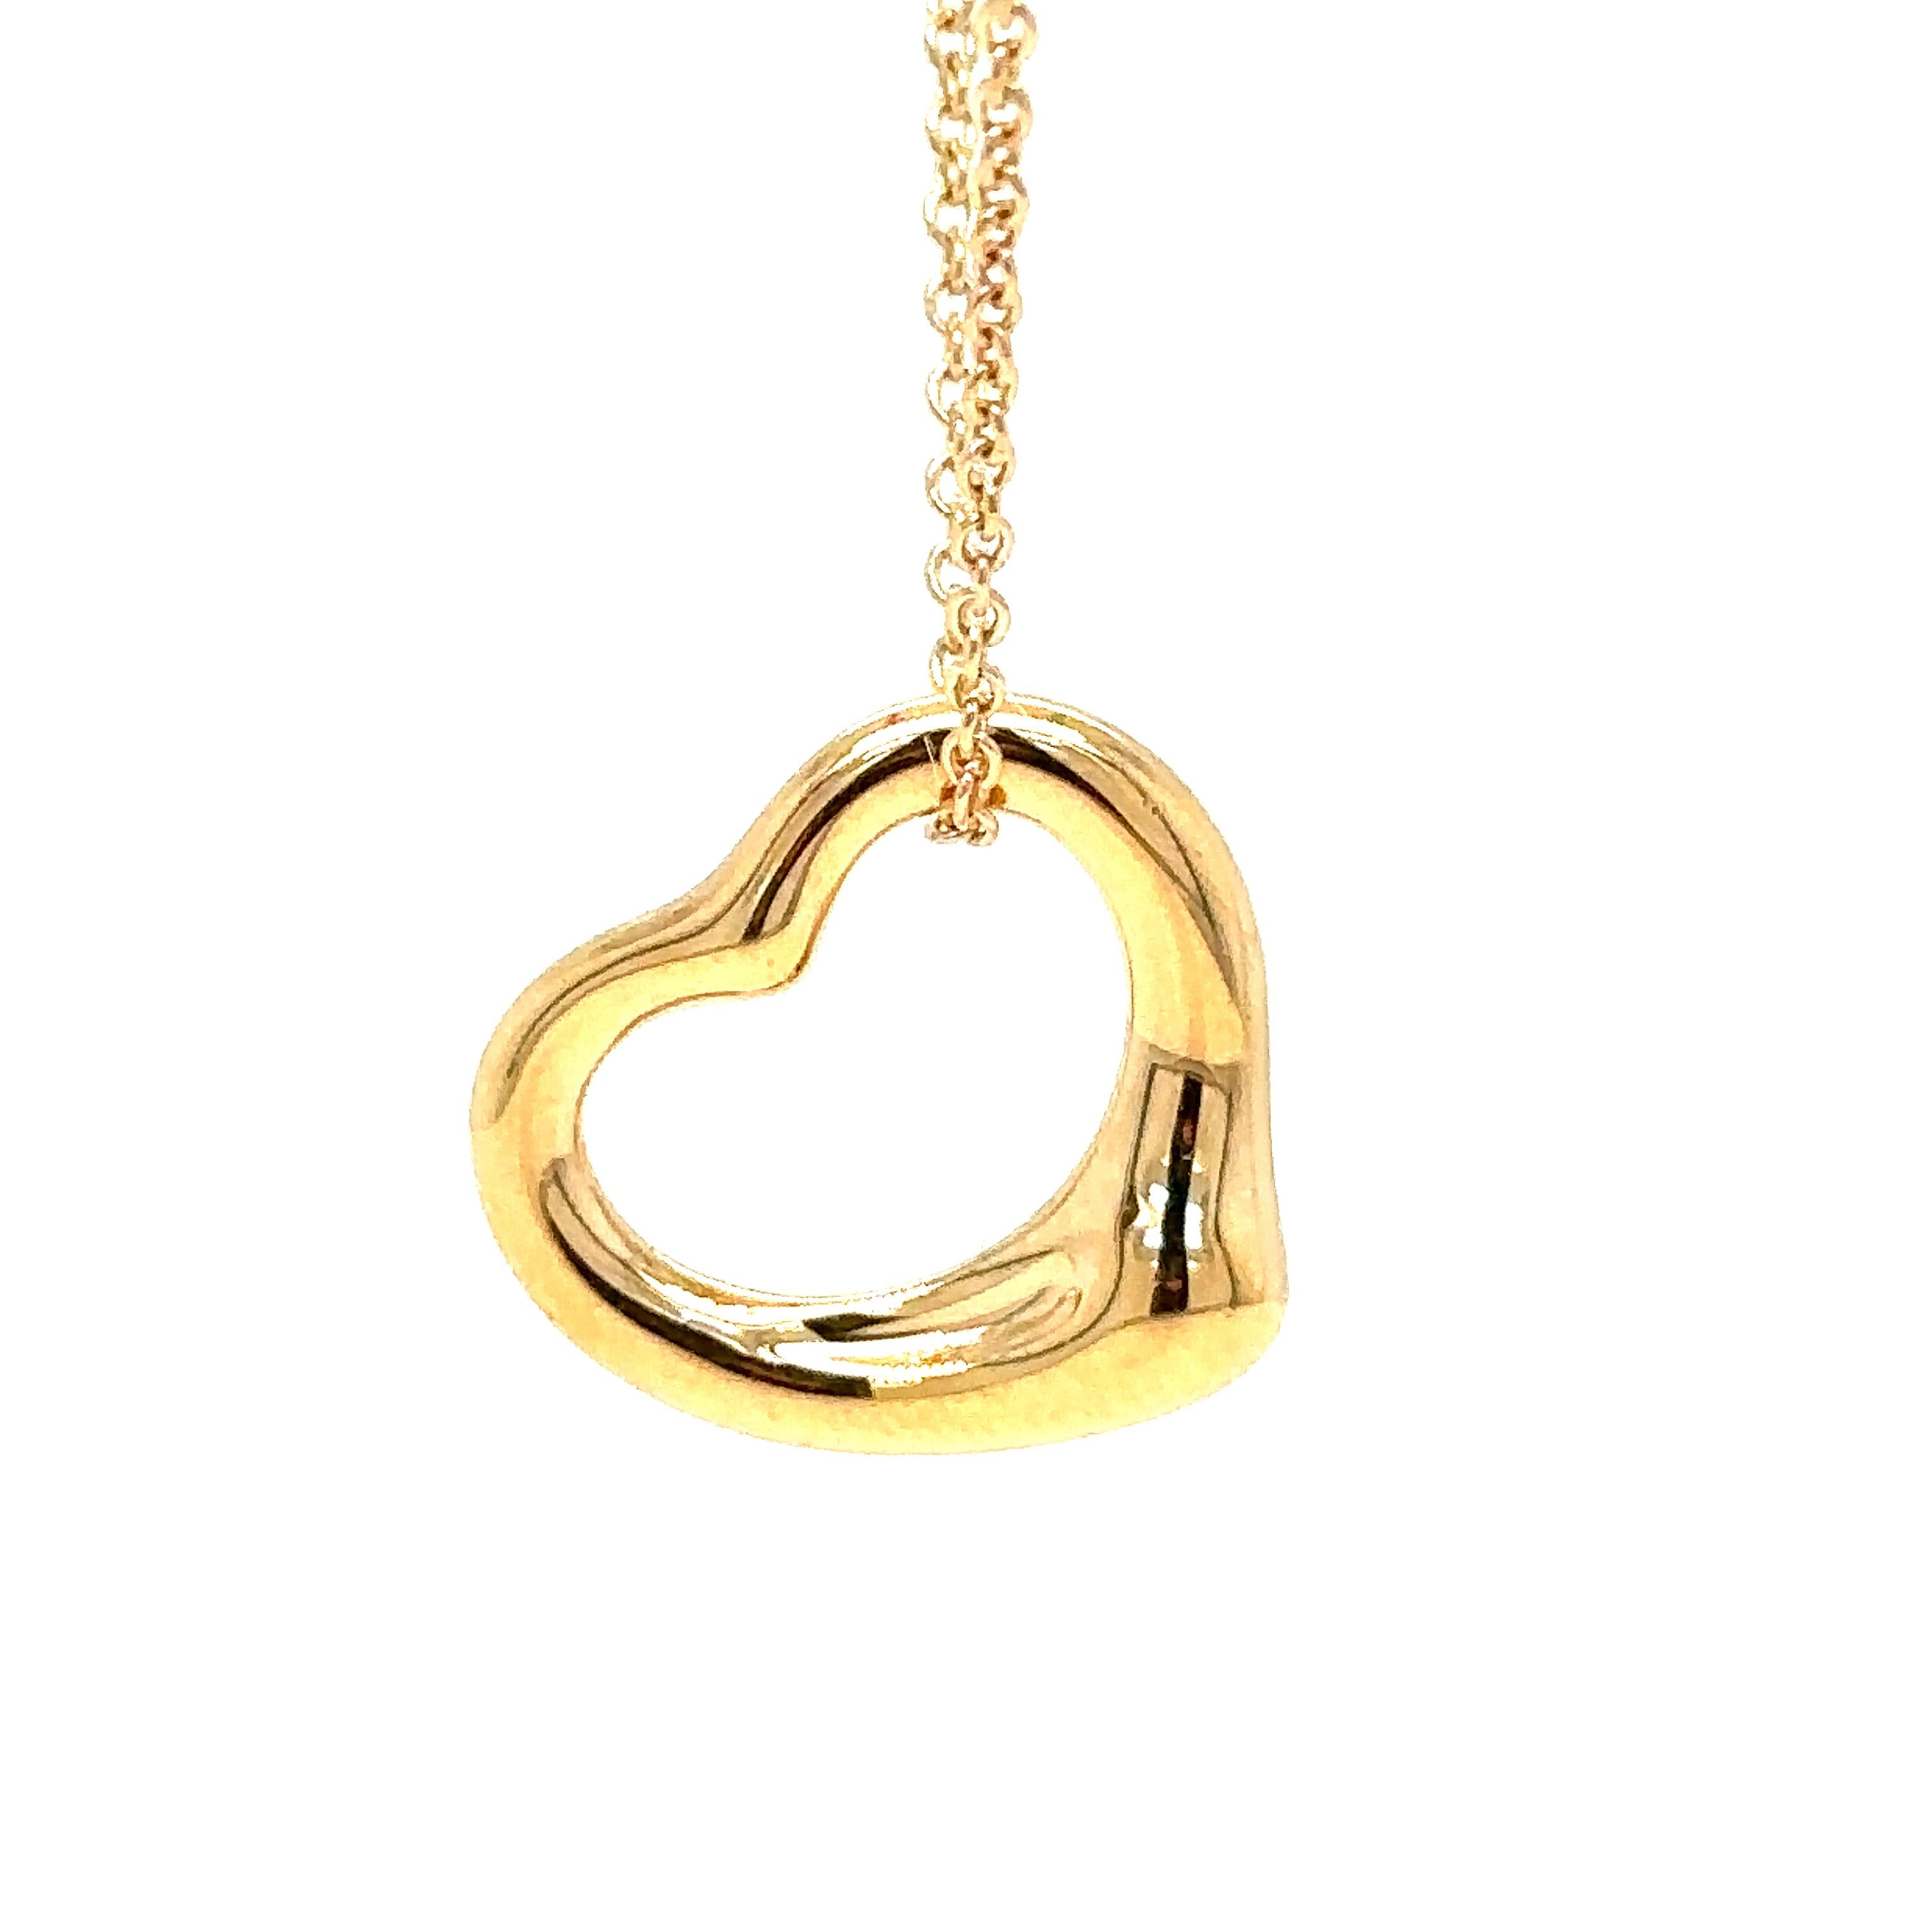 Tiffany & Co Open Heart Pendant in 18ct Gold, on a 16 inch chain, 16mm wide. Original designs copyrighted by Elsa Peretti.

Metal: 18ct Gold
Carat: N/A
Colour: N/A
Clarity: N/A
Cut: N/A
Weight: N/A
Engravings/Markings: N/A

Size/Measurement: 16in